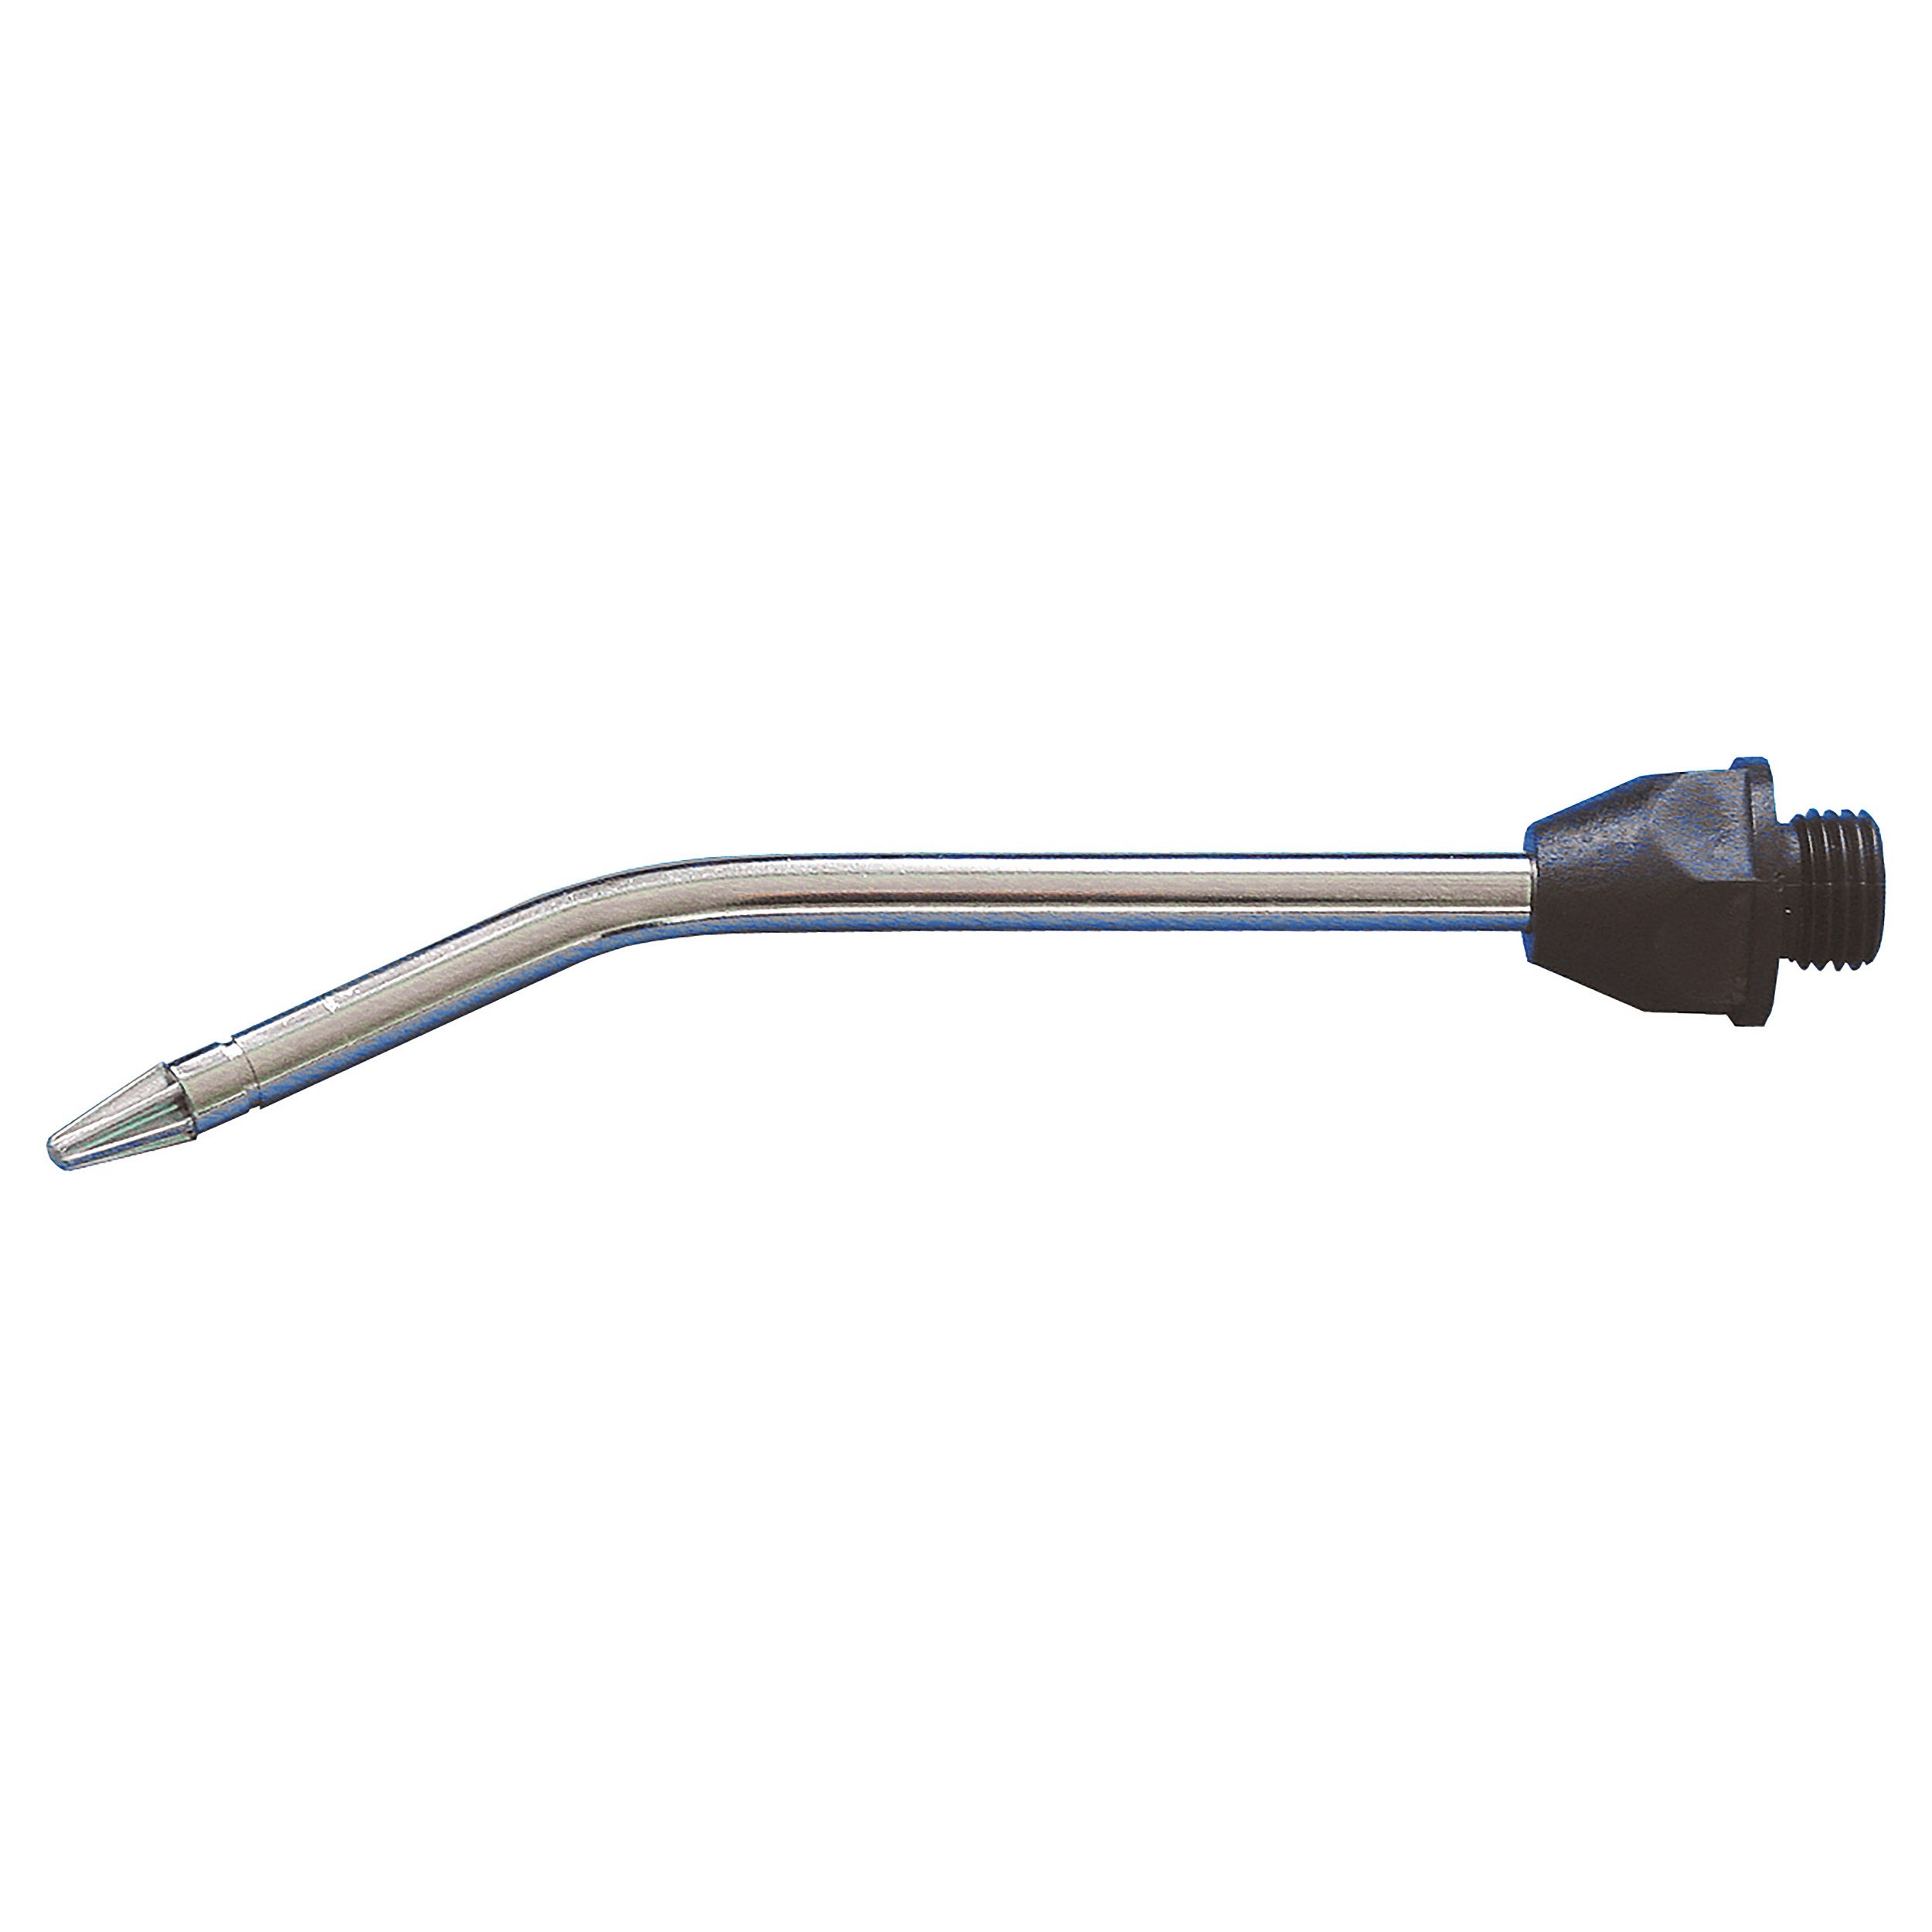 Noise reducing and safety nozzle safetystar, angled, star-shaped, nickel-plated steel, L: 120 mm, approx. 200 Nl/min at 72.5 psi